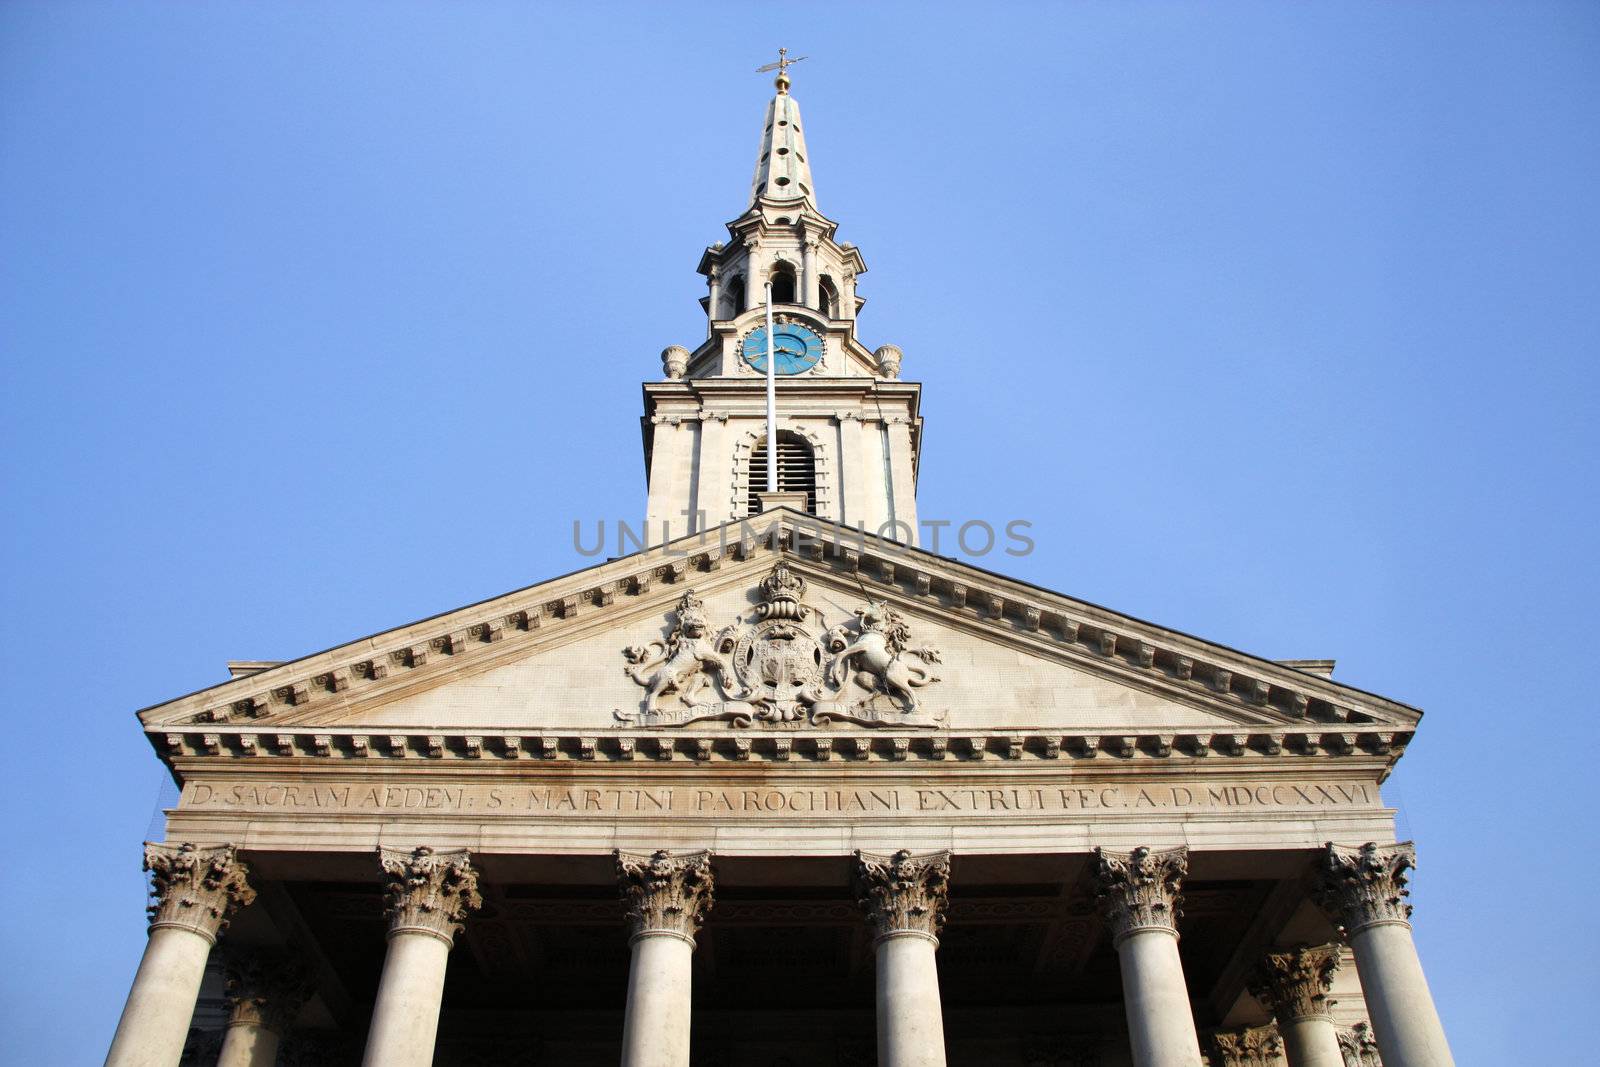 St. Martin-in-the-Fields - Anglican church at the northeast corner of Trafalgar Square in the City of Westminster, London